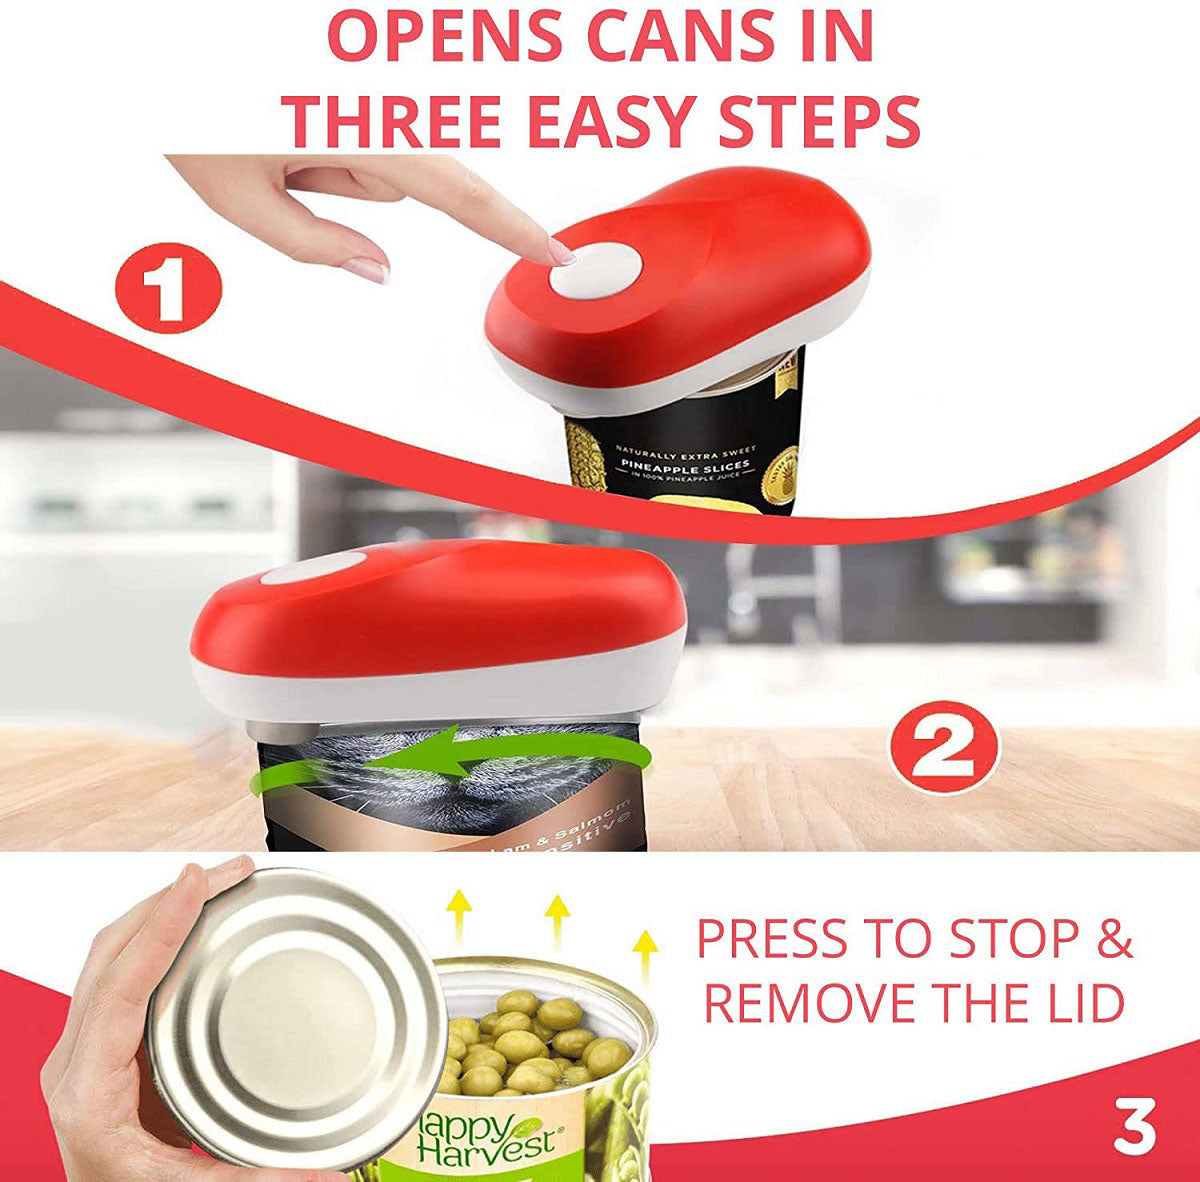 Kitchen Mama One Touch Can Opener: Open Cans with Simple Press of A Button - Auto Stop As Task COMPLETES, Ergonomic, Smooth Edge